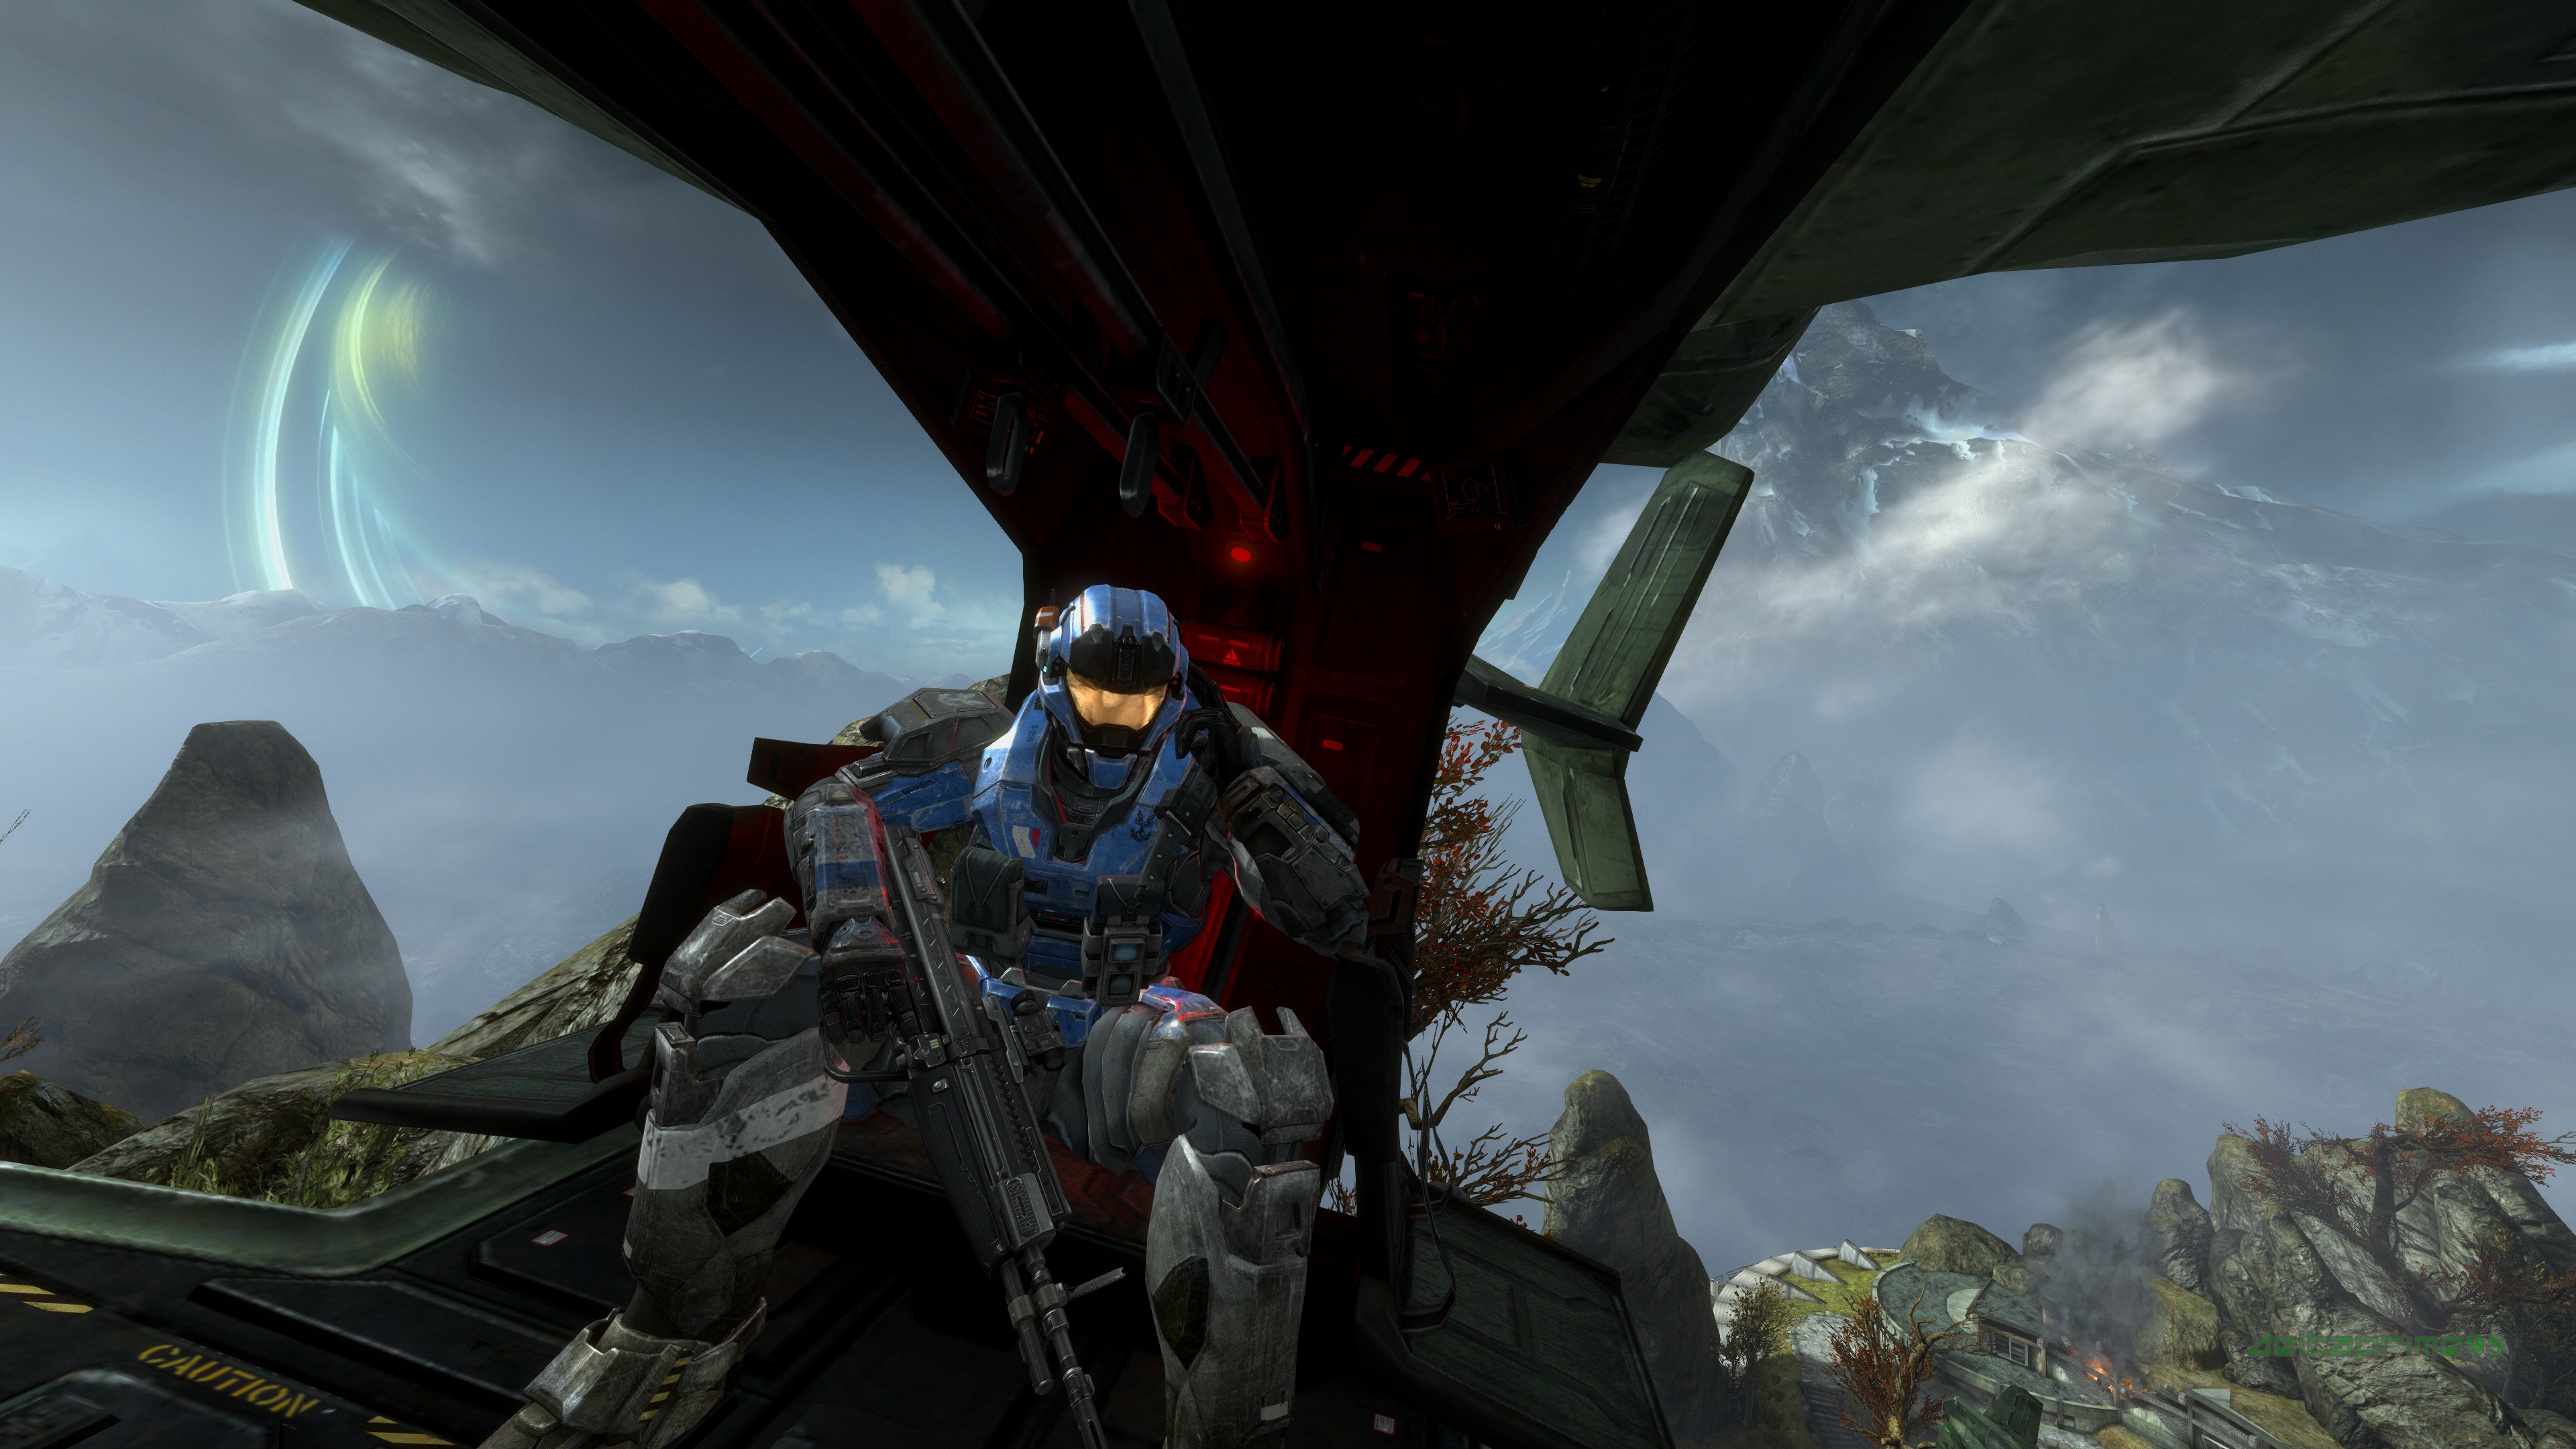 PC Gaming In Game Screen Shot Video Games Science Fiction Futuristic Halo Reach Planet Reach UH 114  3840x2160